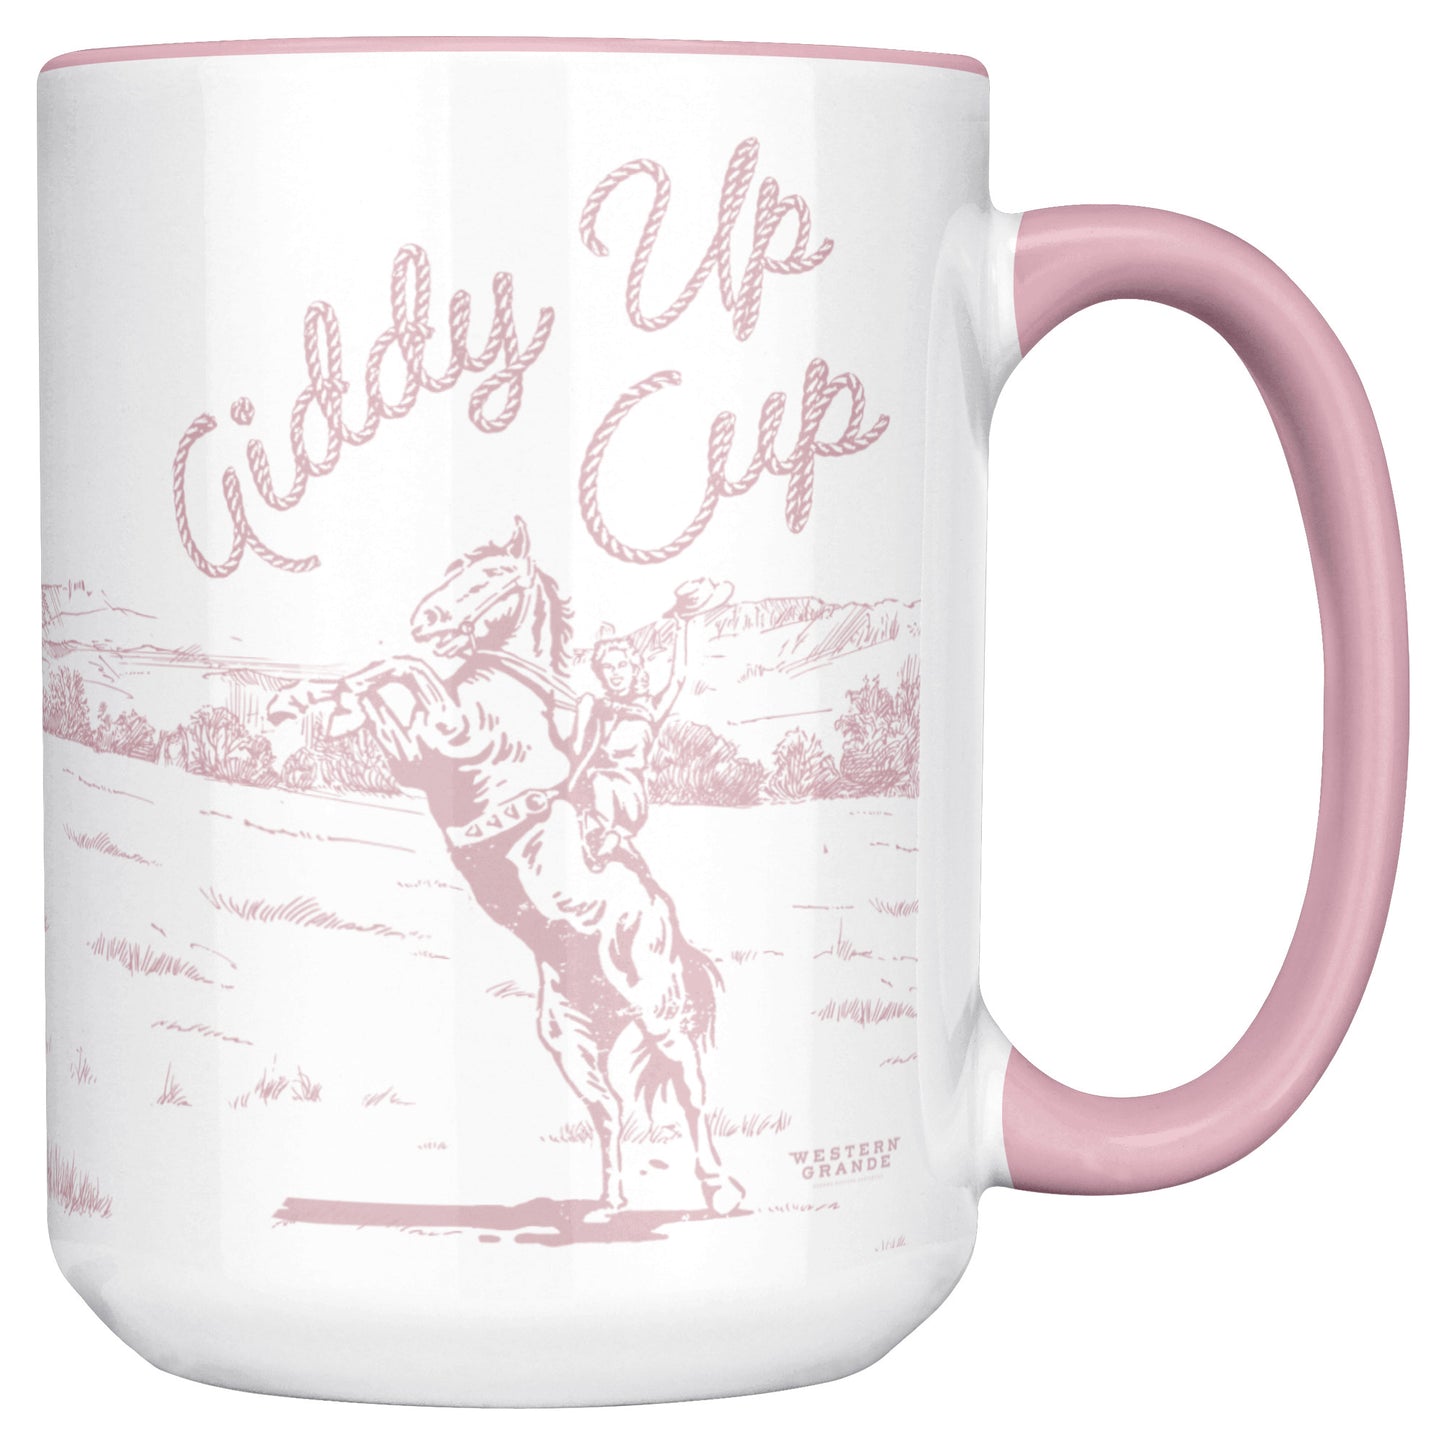 GIDDY UP CUP - PINK HANDLE- PINK ART